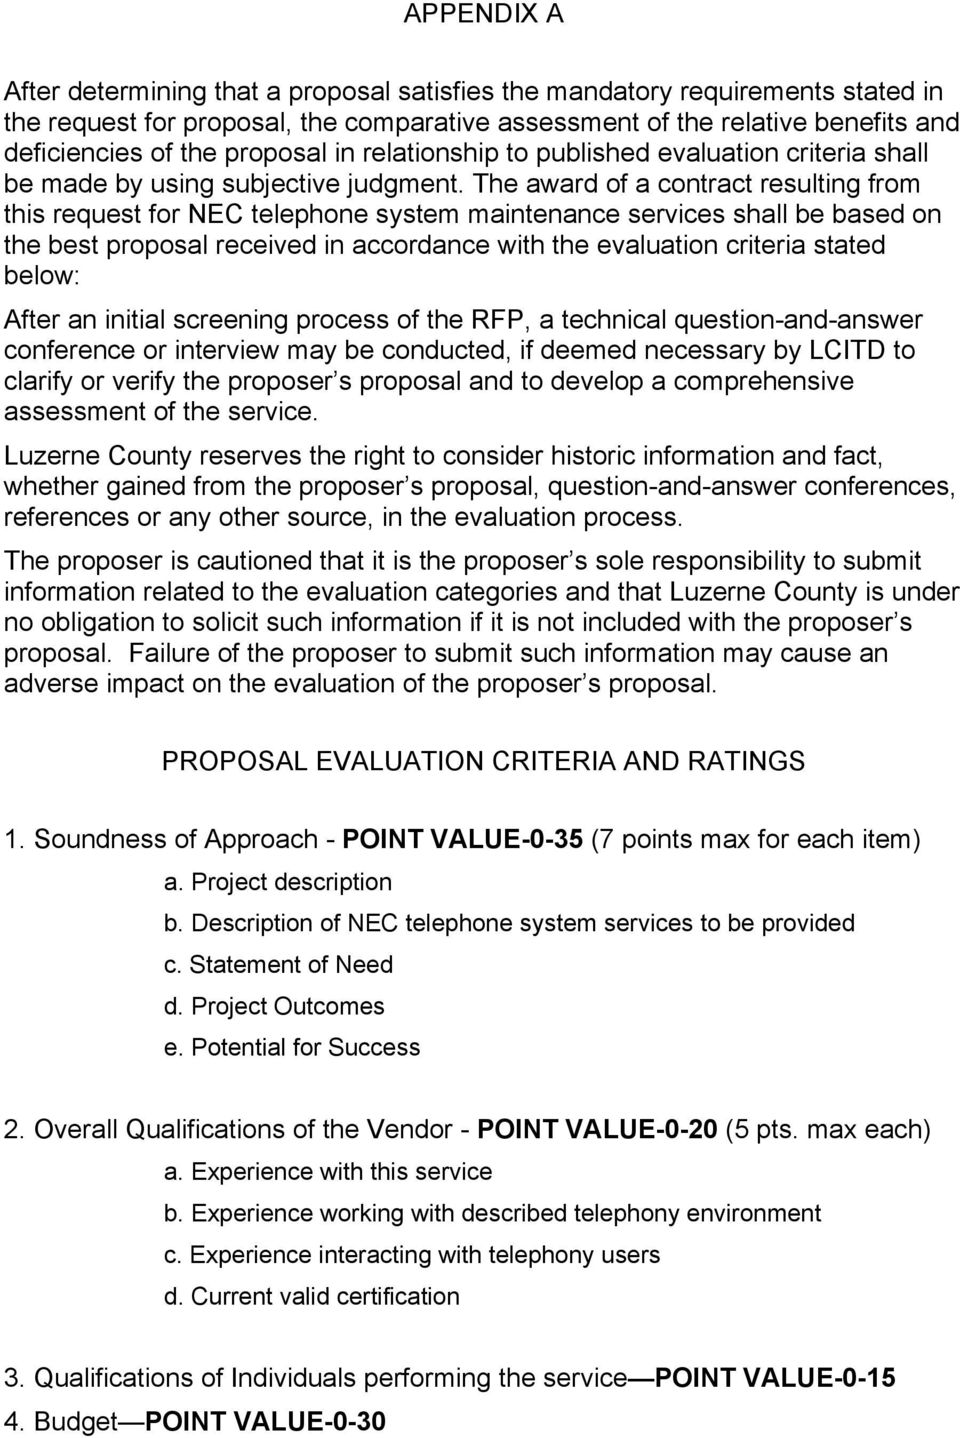 The award of a contract resulting from this request for NEC telephone system maintenance services shall be based on the best proposal received in accordance with the evaluation criteria stated below: